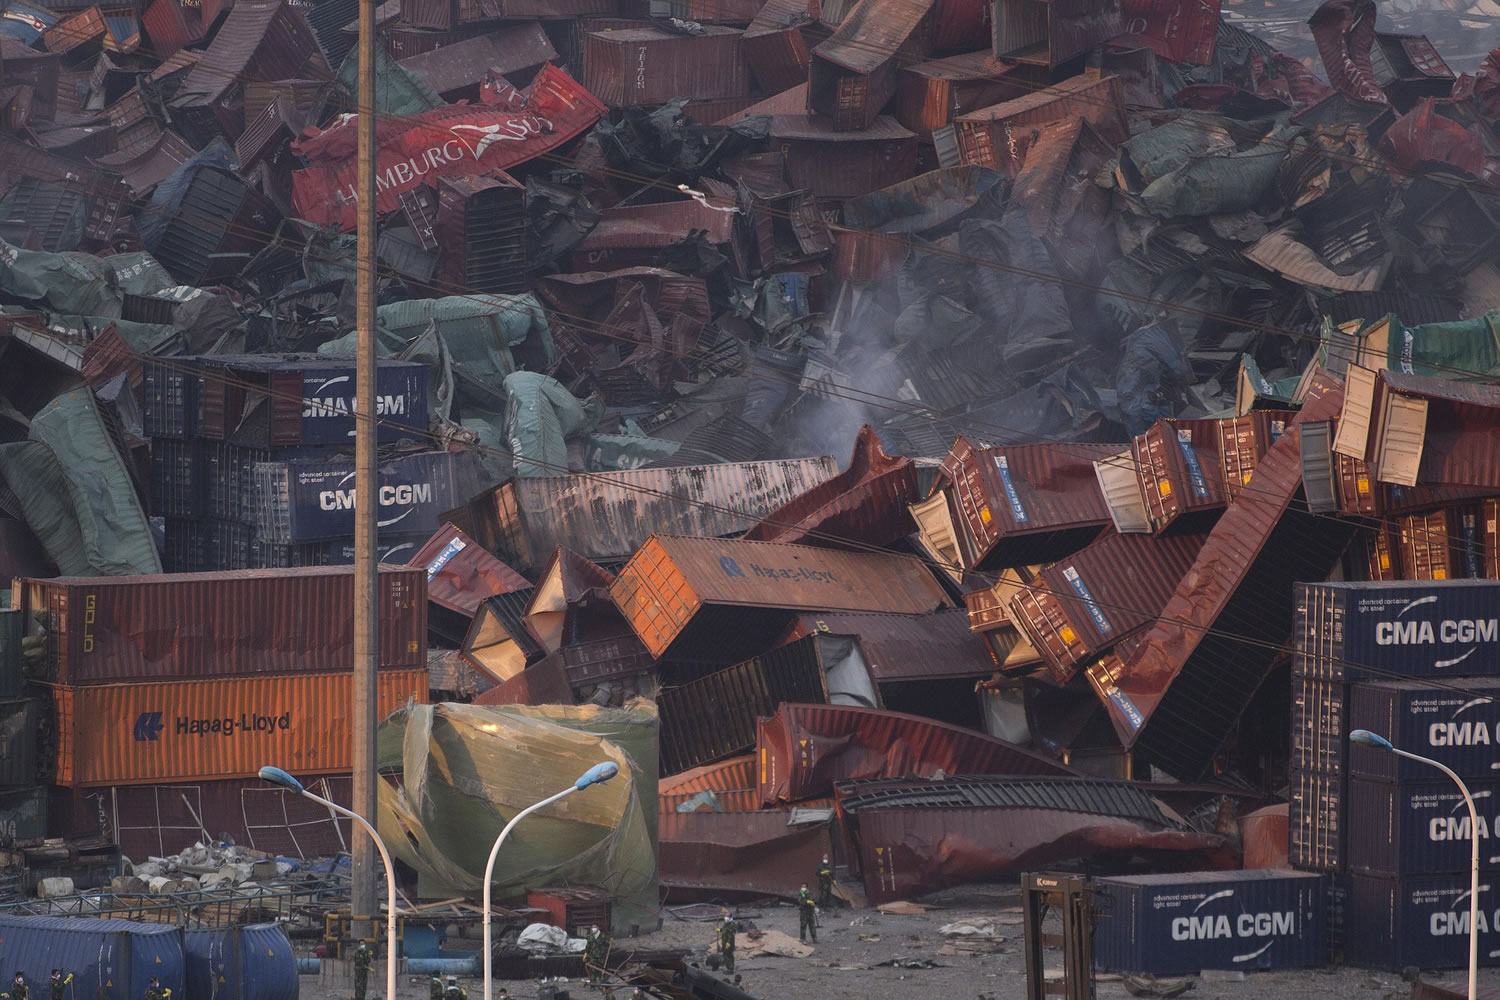 Workers sweep the area near deformed containers piled up after Wednesday's explosion in northeastern China's Tianjin municipality, Friday, Aug. 14, 2015. Rescuers pulled out a firefighter trapped for 32 hours after responding to a fire and huge explosions in the Chinese port city as authorities dealt Friday with a fire still smoldering amid potentially dangerous chemicals.